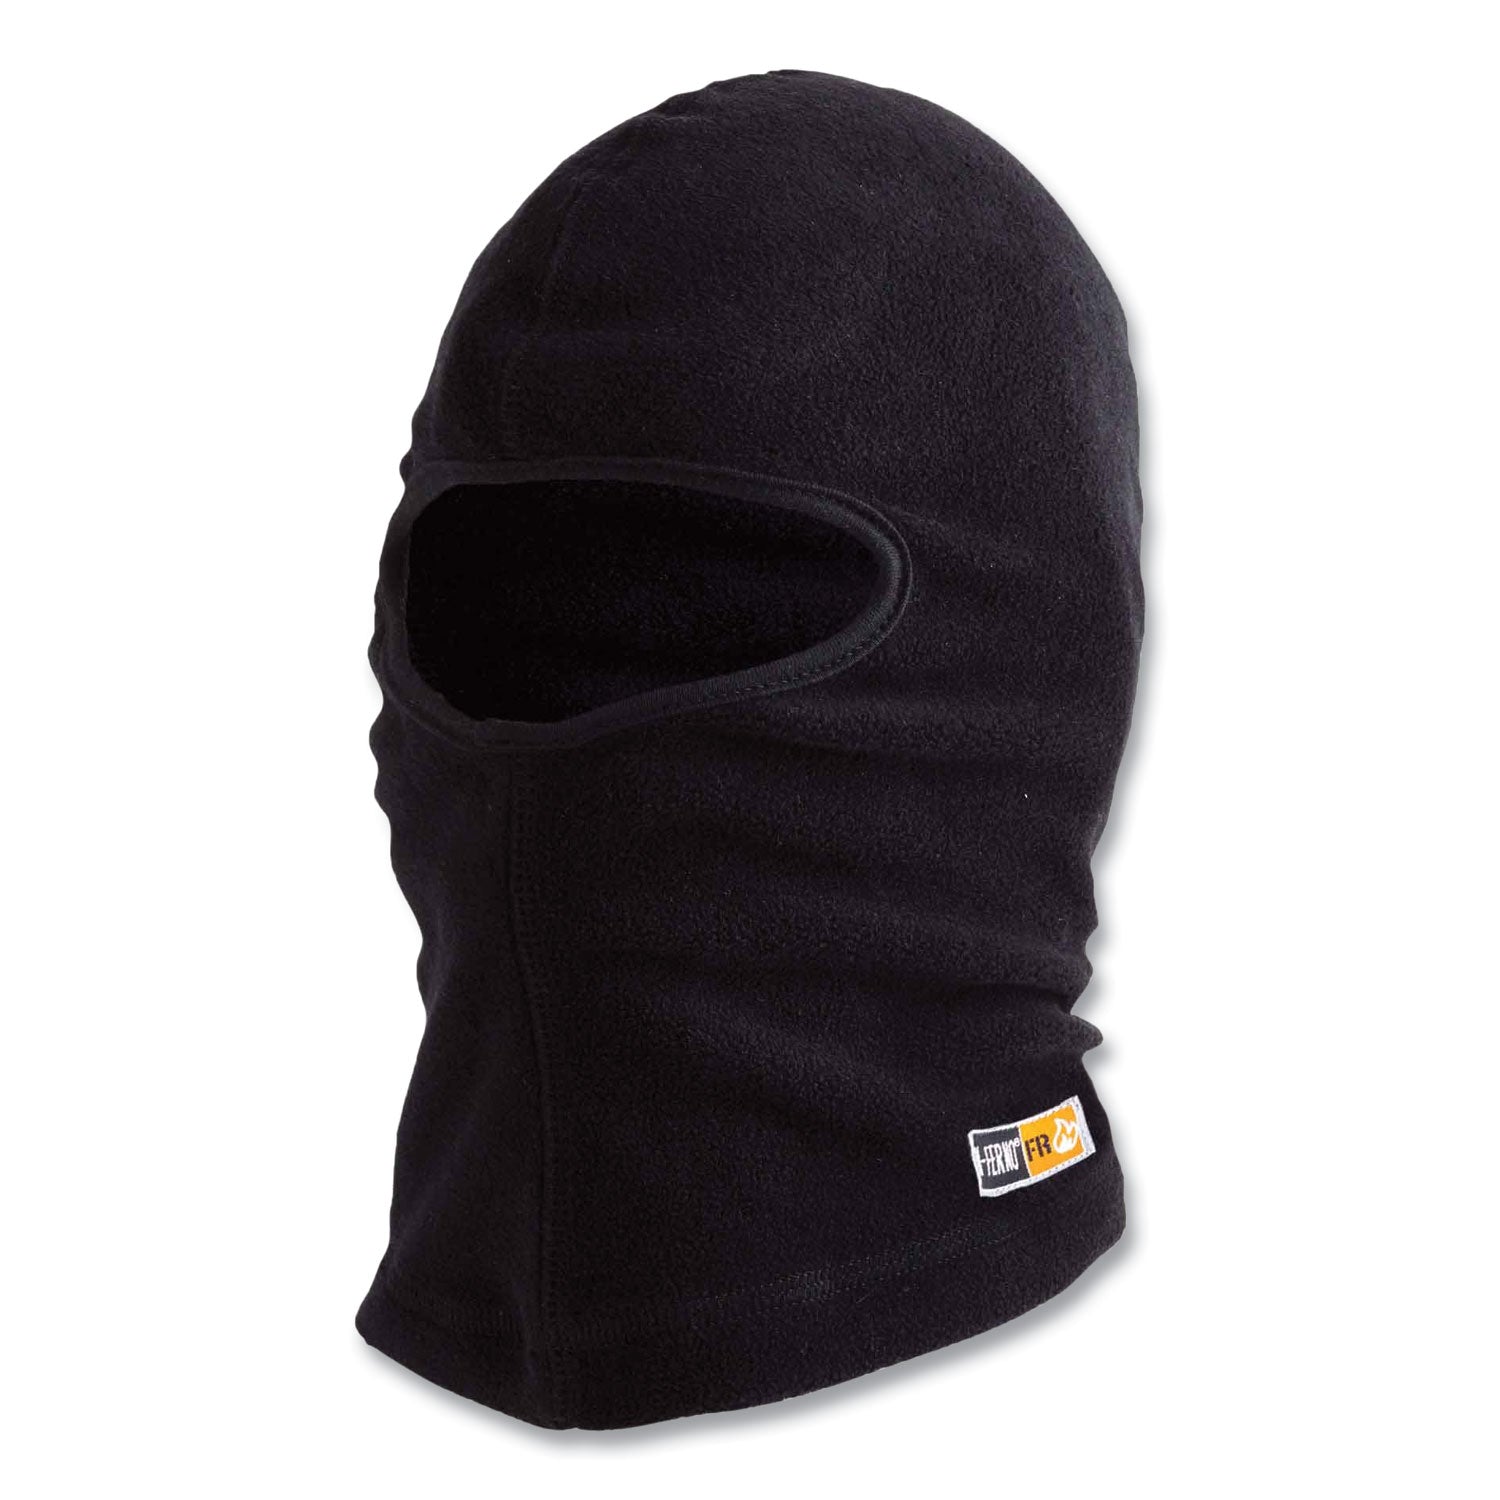 n-ferno-6828-modacrylic-blend-fr-fleece-balaclava-face-mask-one-size-fits-most-black-ships-in-1-3-business-days_ego16828 - 1